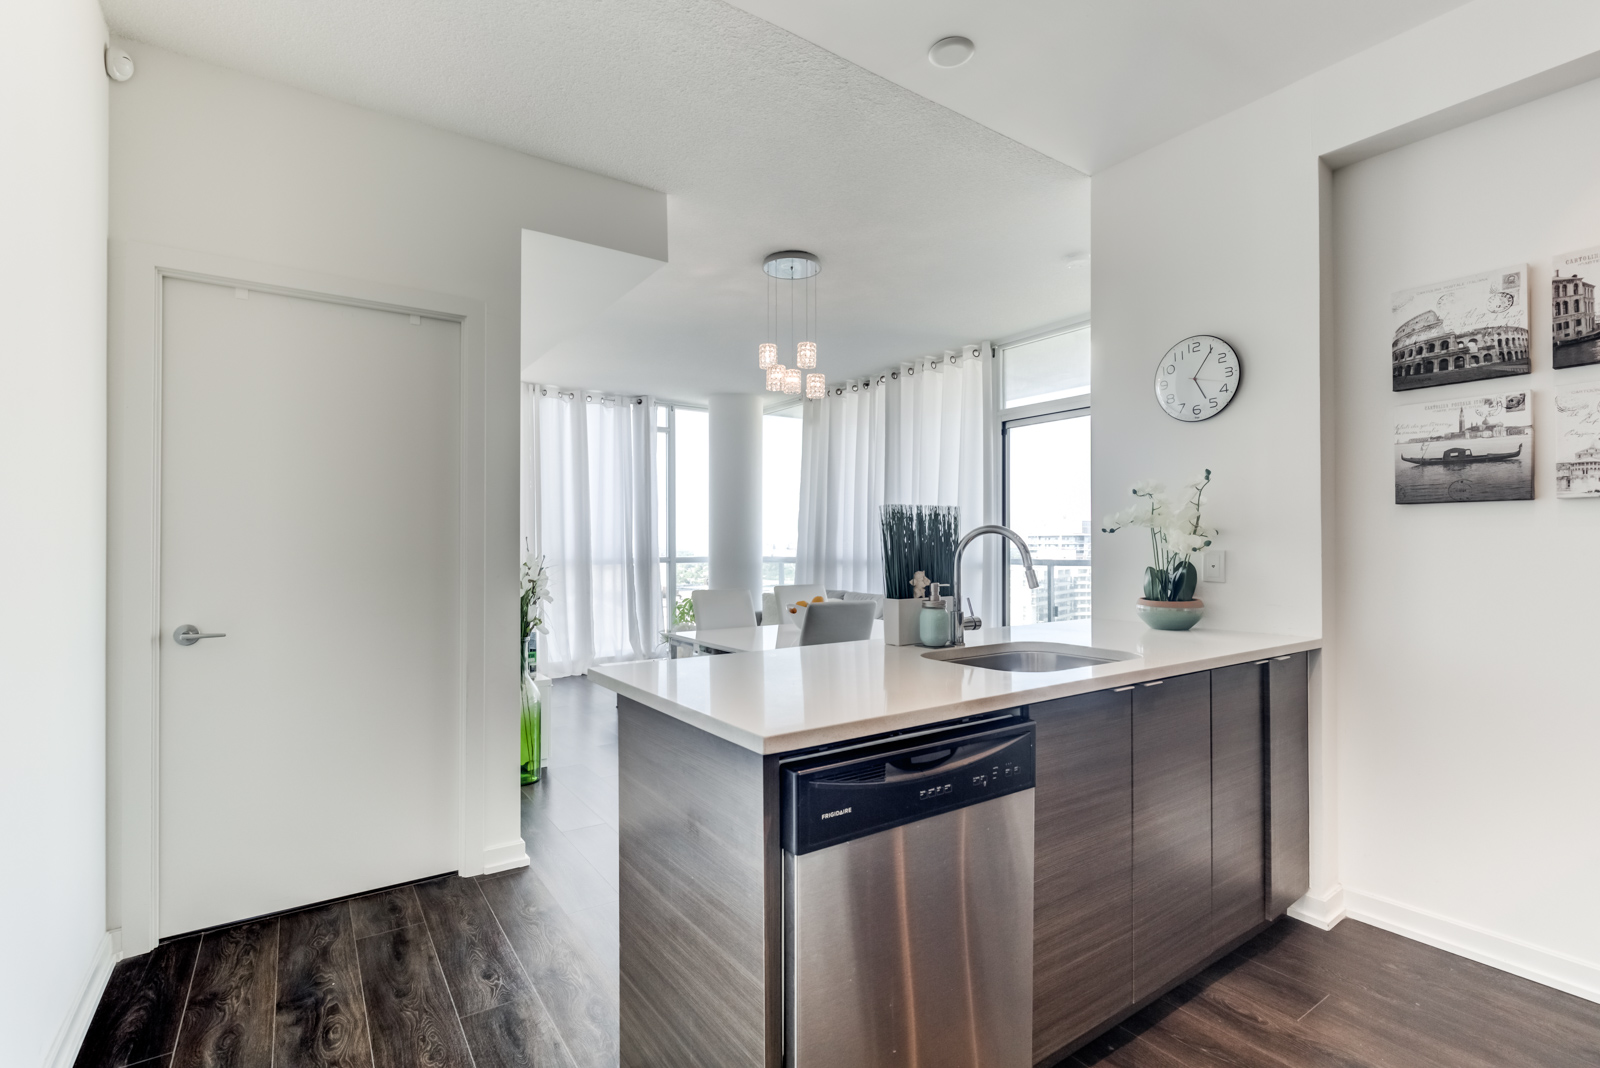 Kitchen breakfast bar with built-in dishwasher at 62 Forest Manor Rd Unit 1803, Toronto.